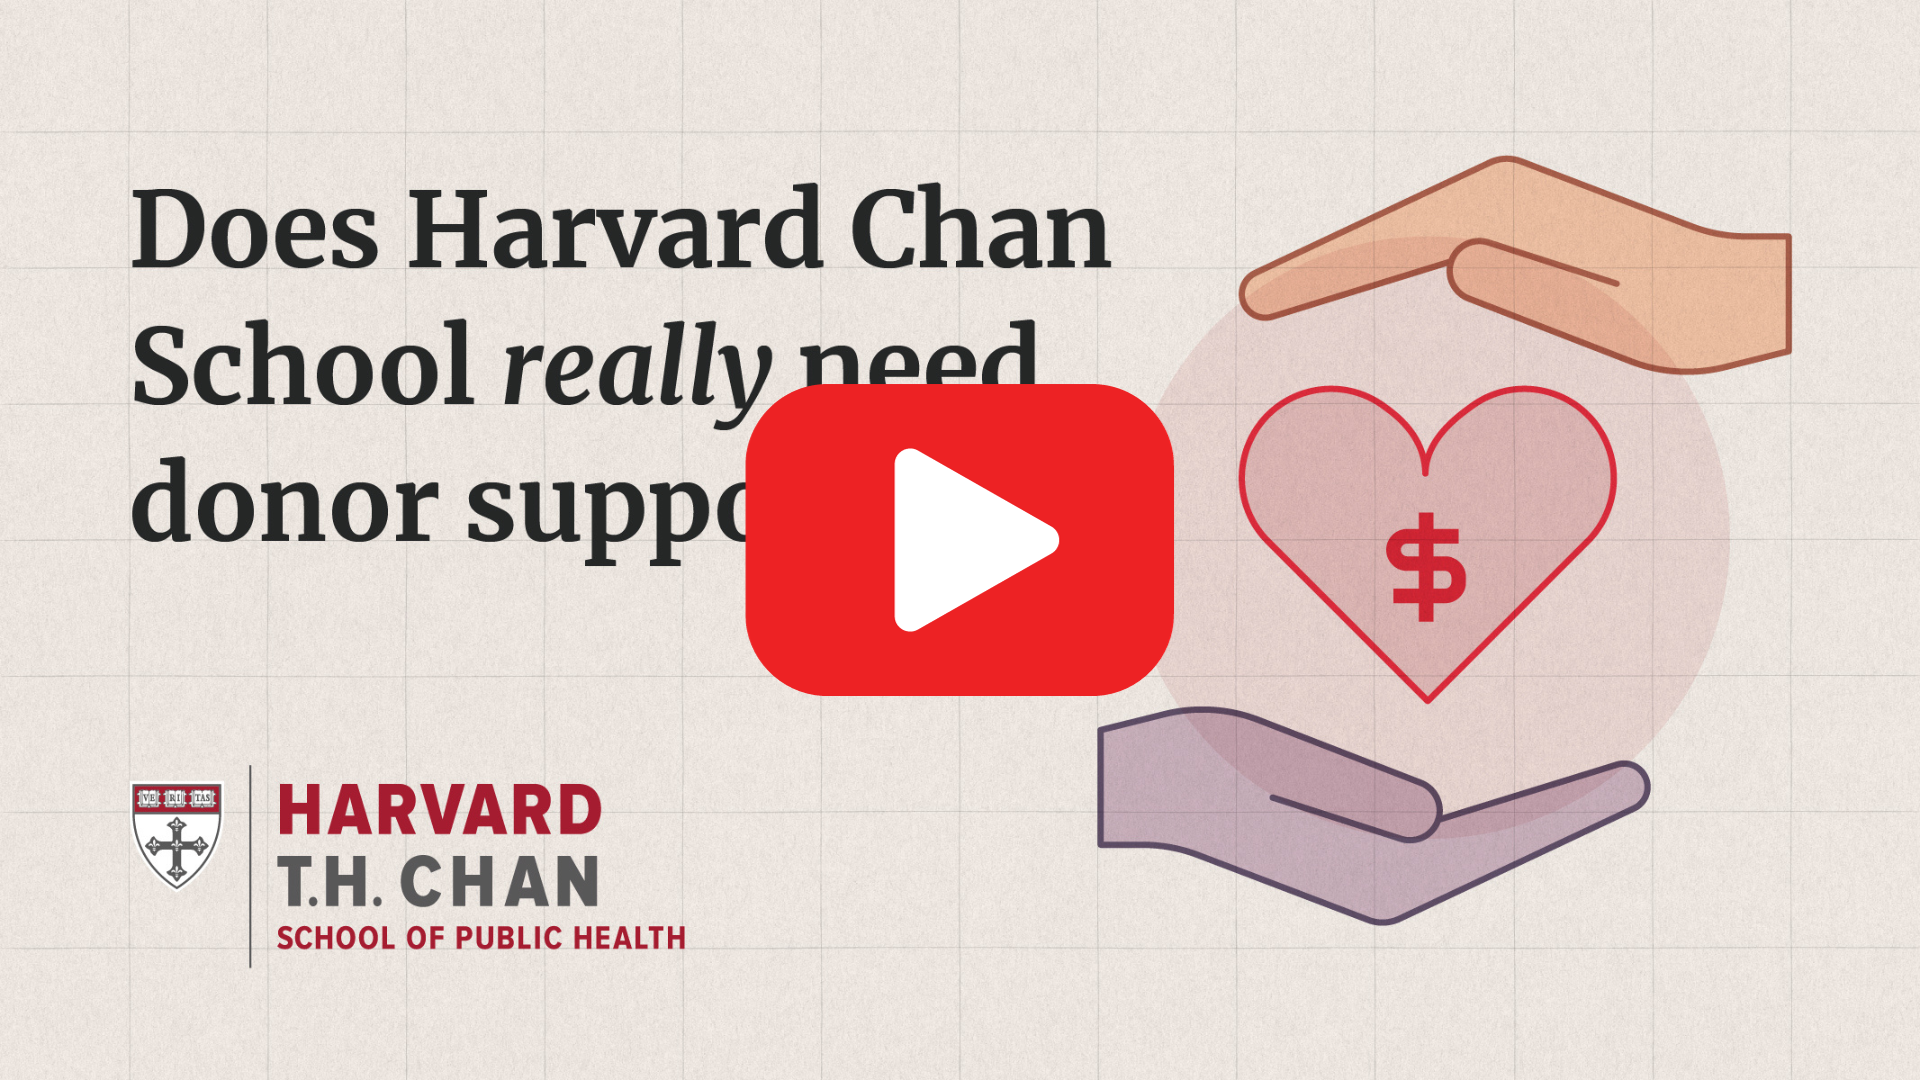 Does Harvard Chan School really need donor support?